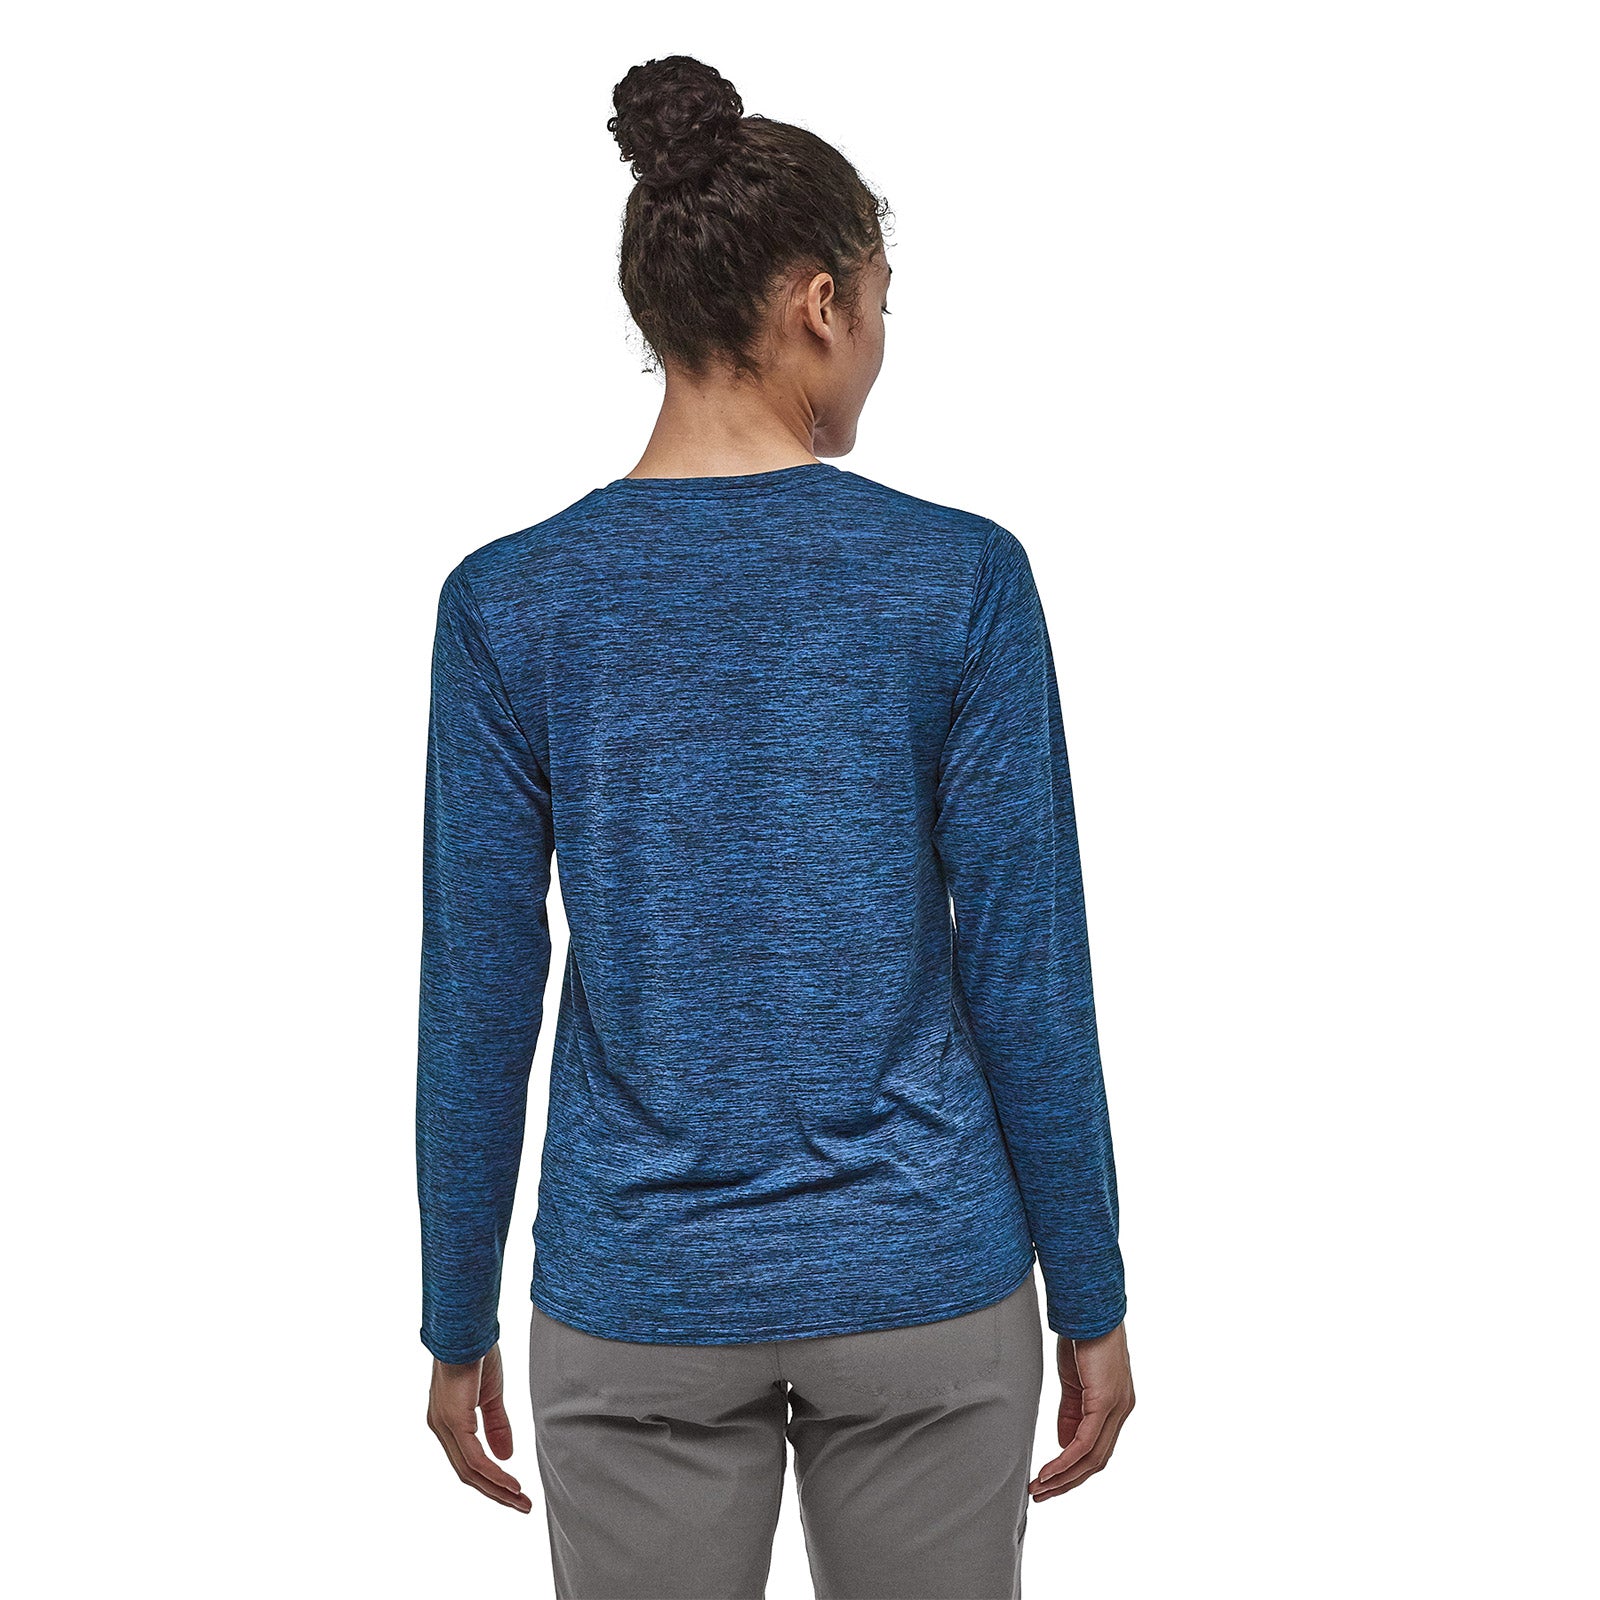 patagonia womens long sleeve capilene daily shirt in viking blue - navy blue x dye, back view on a model